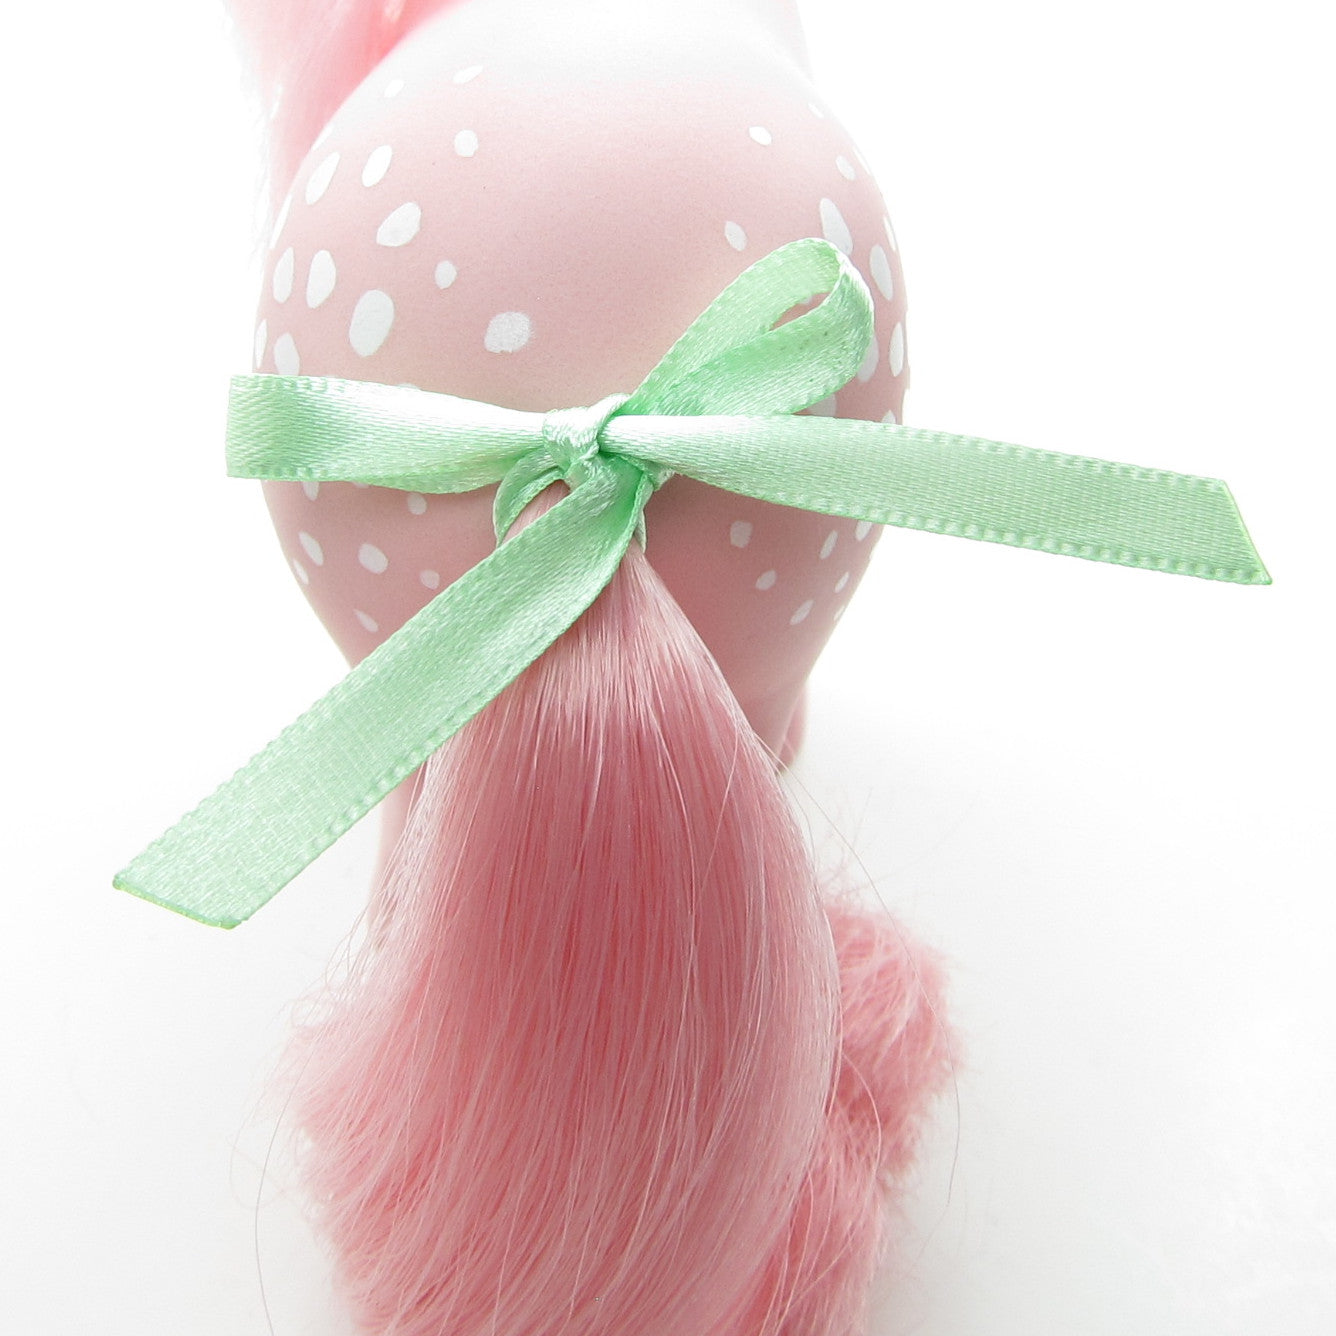 Replacement Pony Hair Ribbons for G1 My Little Ponies - Green